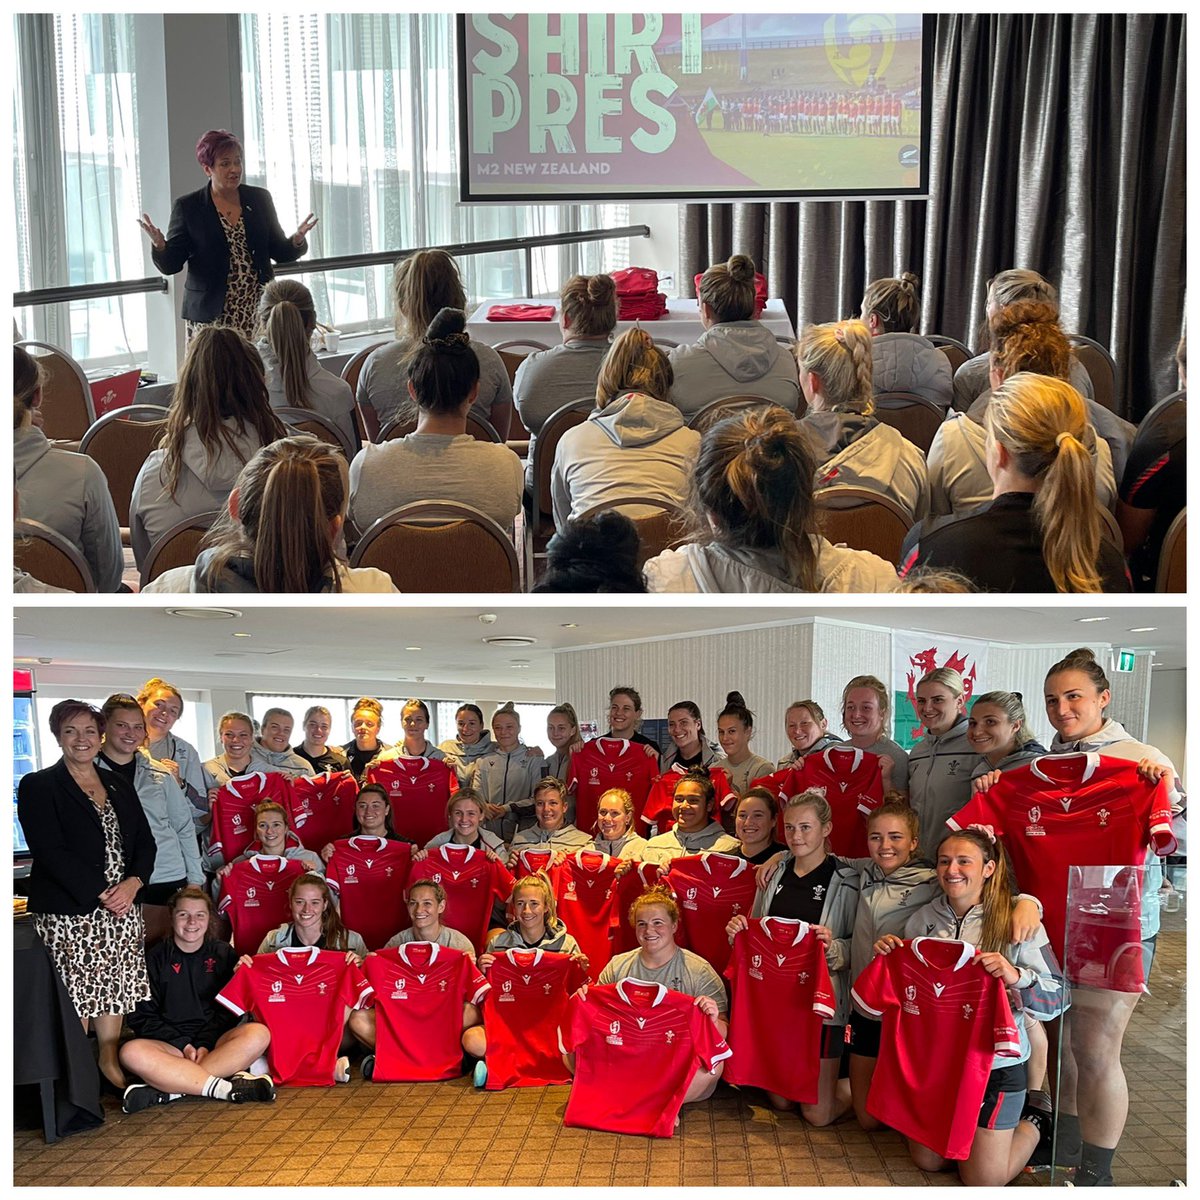 An honour to speak to the Wales Women’s Rugby squad ahead of their @rugbyworldcup match against NZ on Sunday and deliver a message of support on behalf of @WelshGovernment. We are all very proud of you! Pob lwc 🏴󠁧󠁢󠁷󠁬󠁳󠁿 @WRU @NigelWalkerWRU @WGCulture